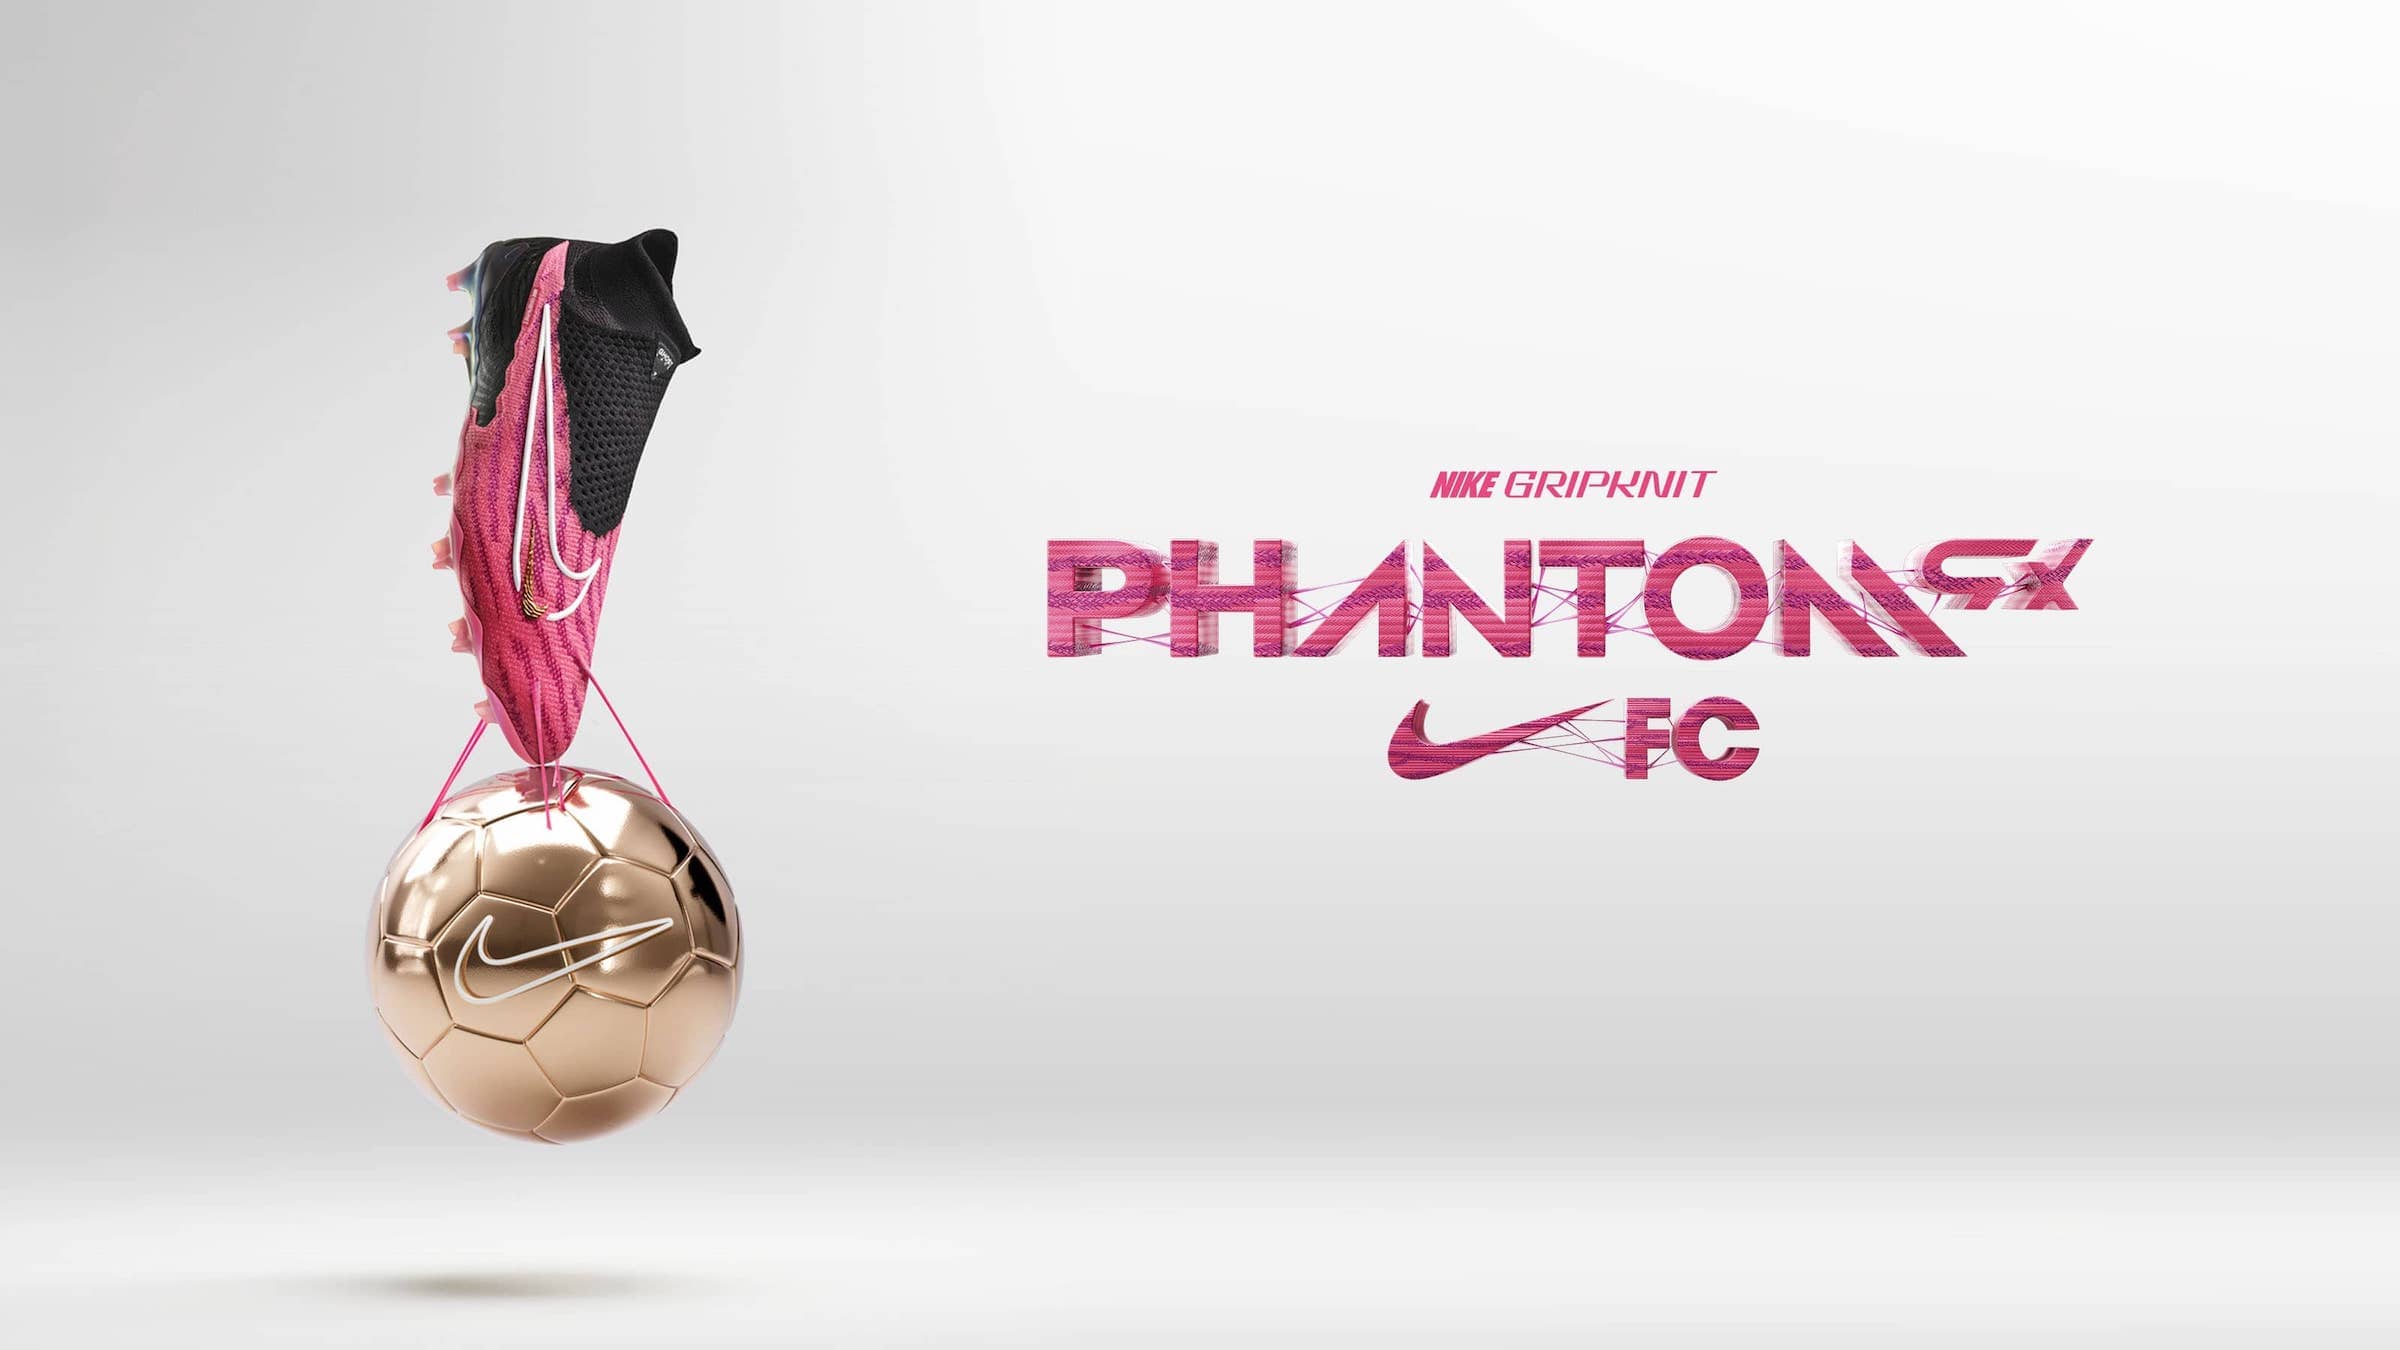 The nike phantom gx takes precision to the next level with its gripknit technology